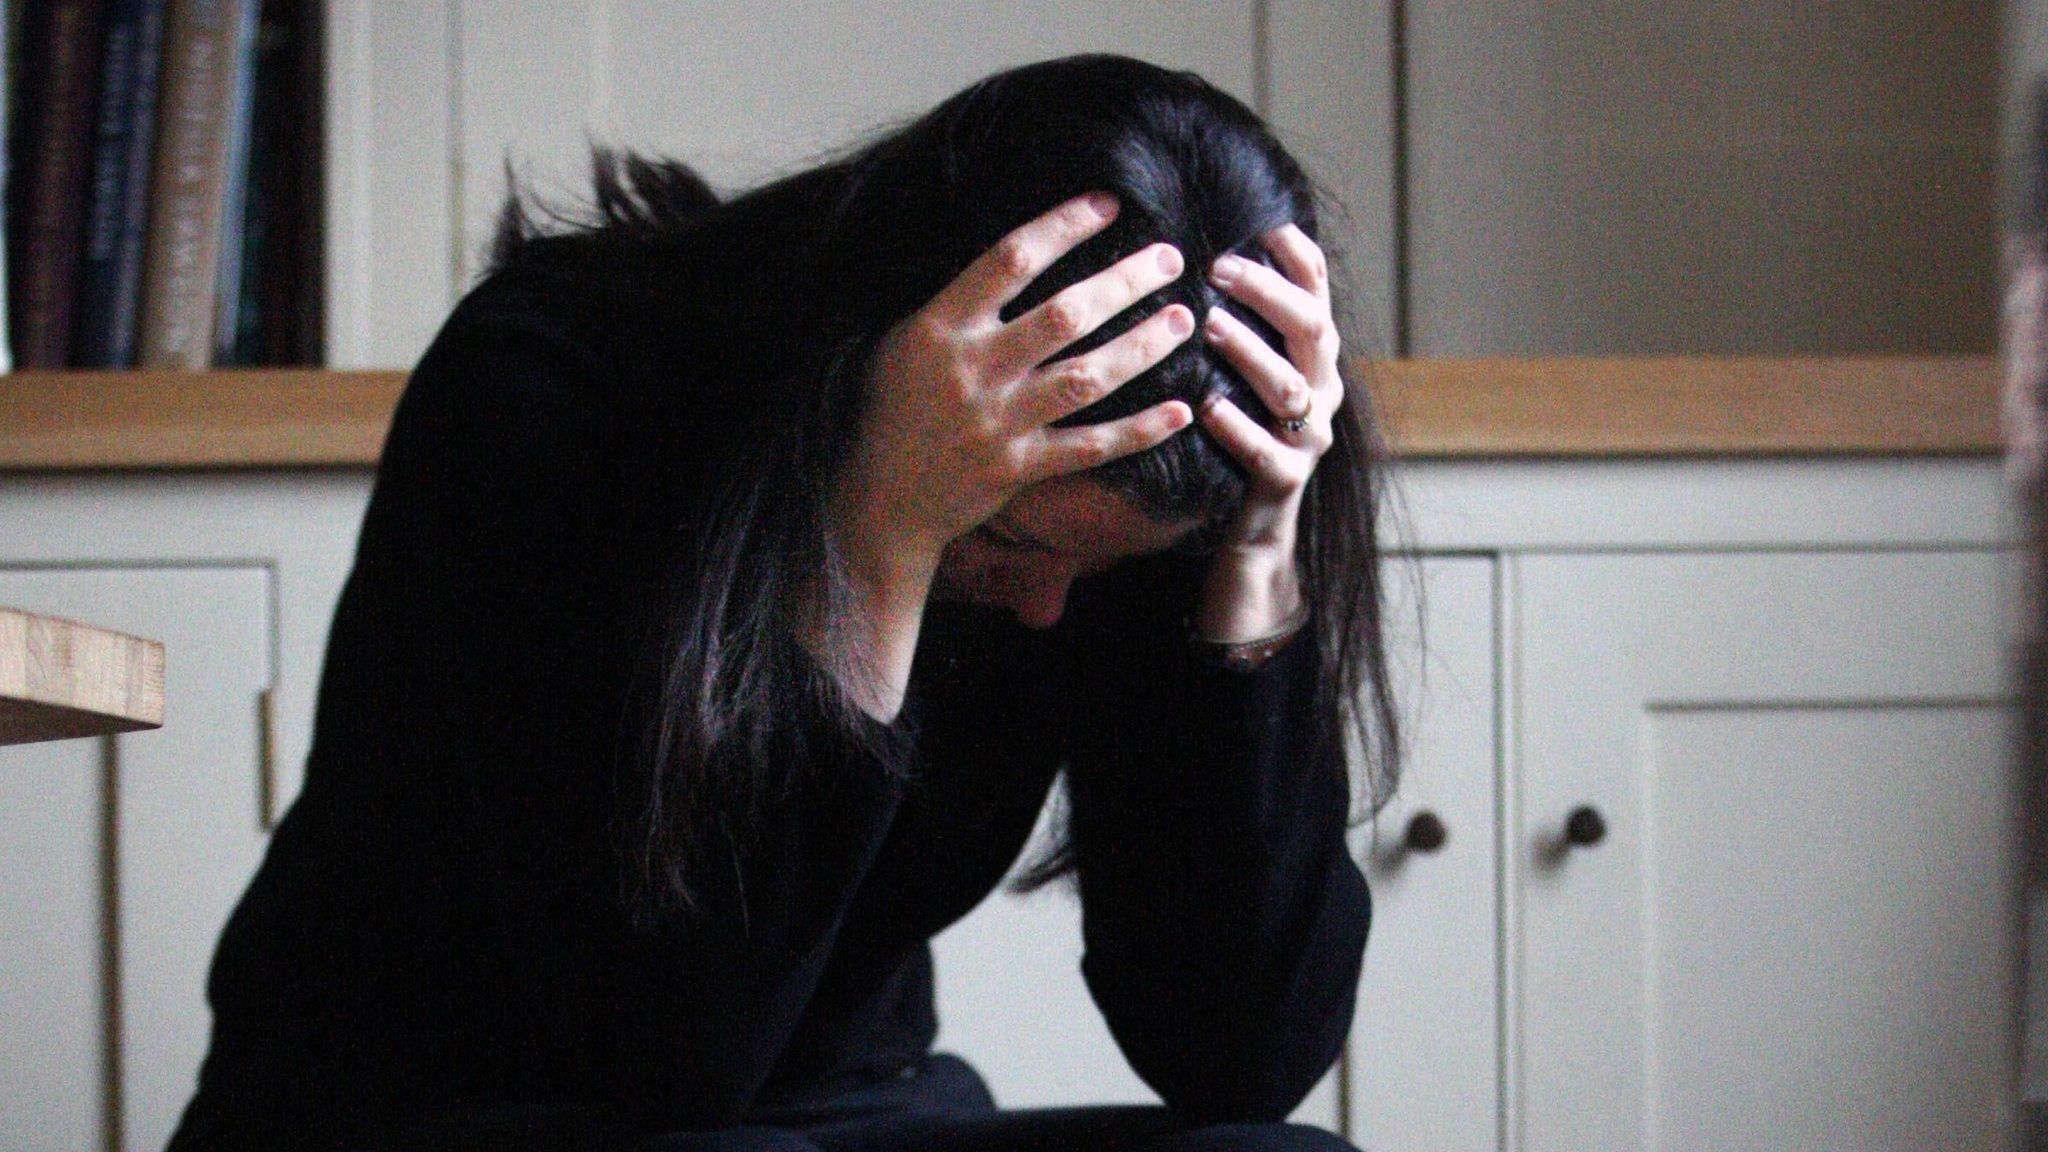 A woman looking distraught, with her hands on her head